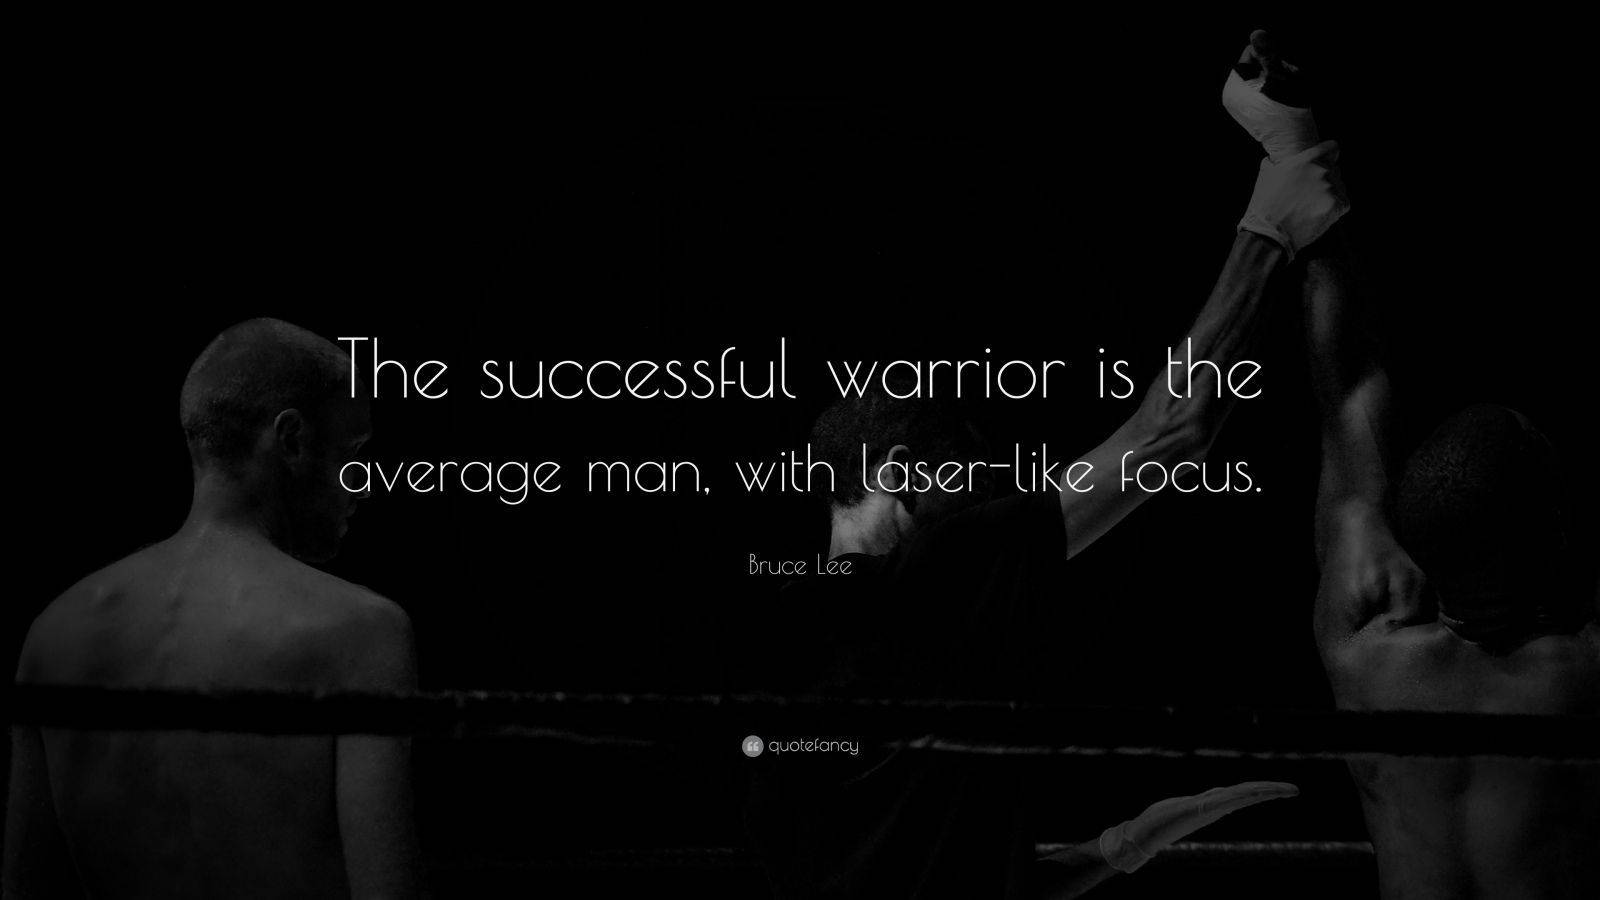 Inspirational Quote By Bruce Lee Background